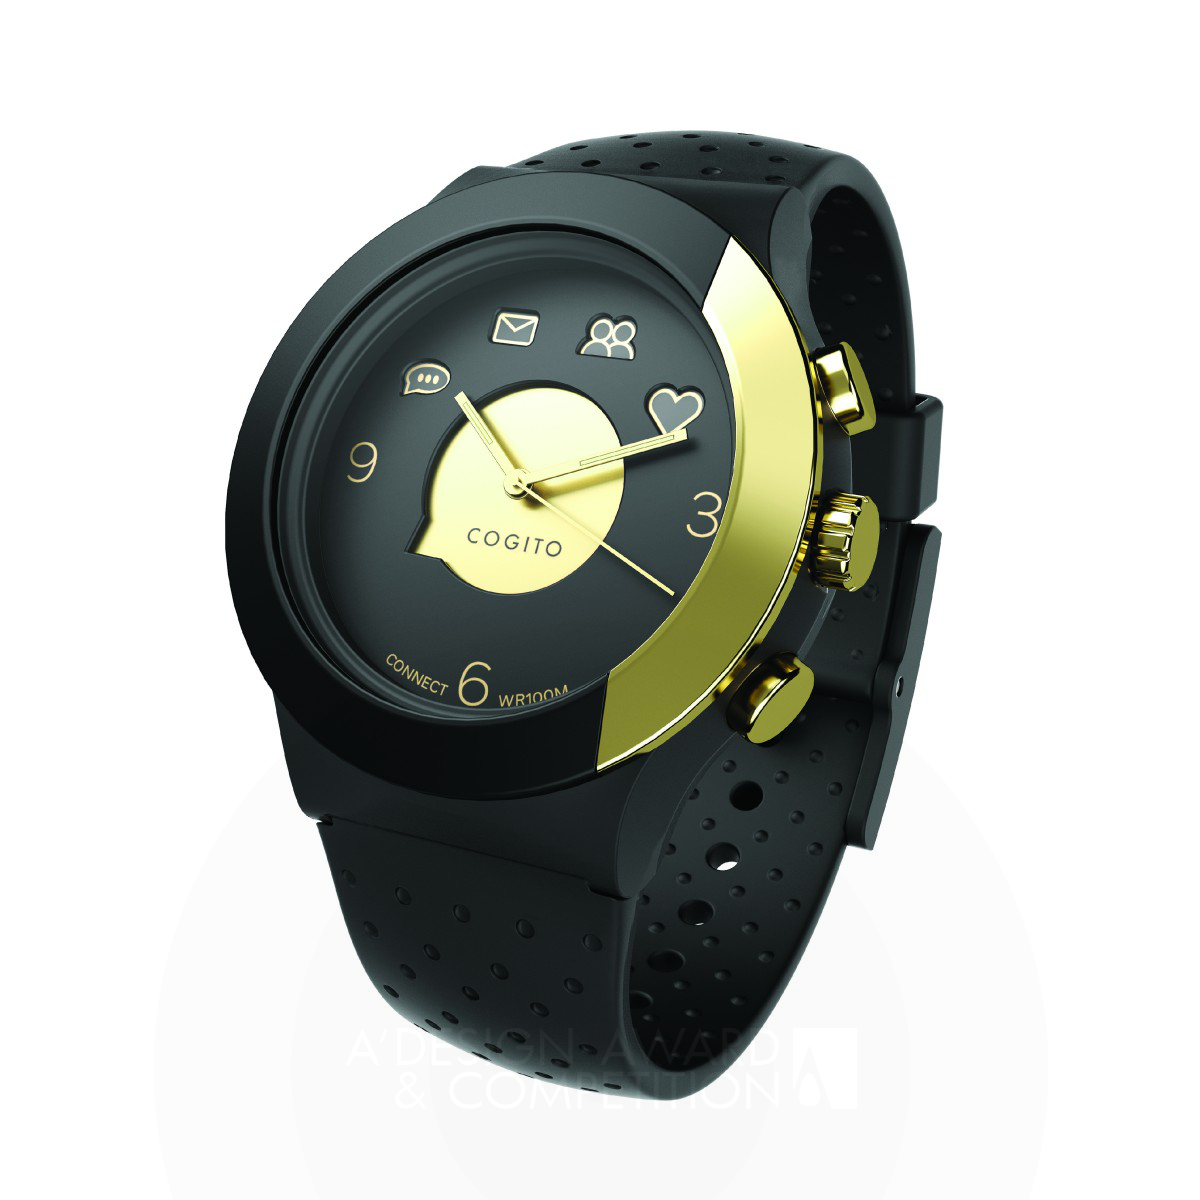 COGITO FIT Connected Watch by CONNECTEDEVICE Ltd